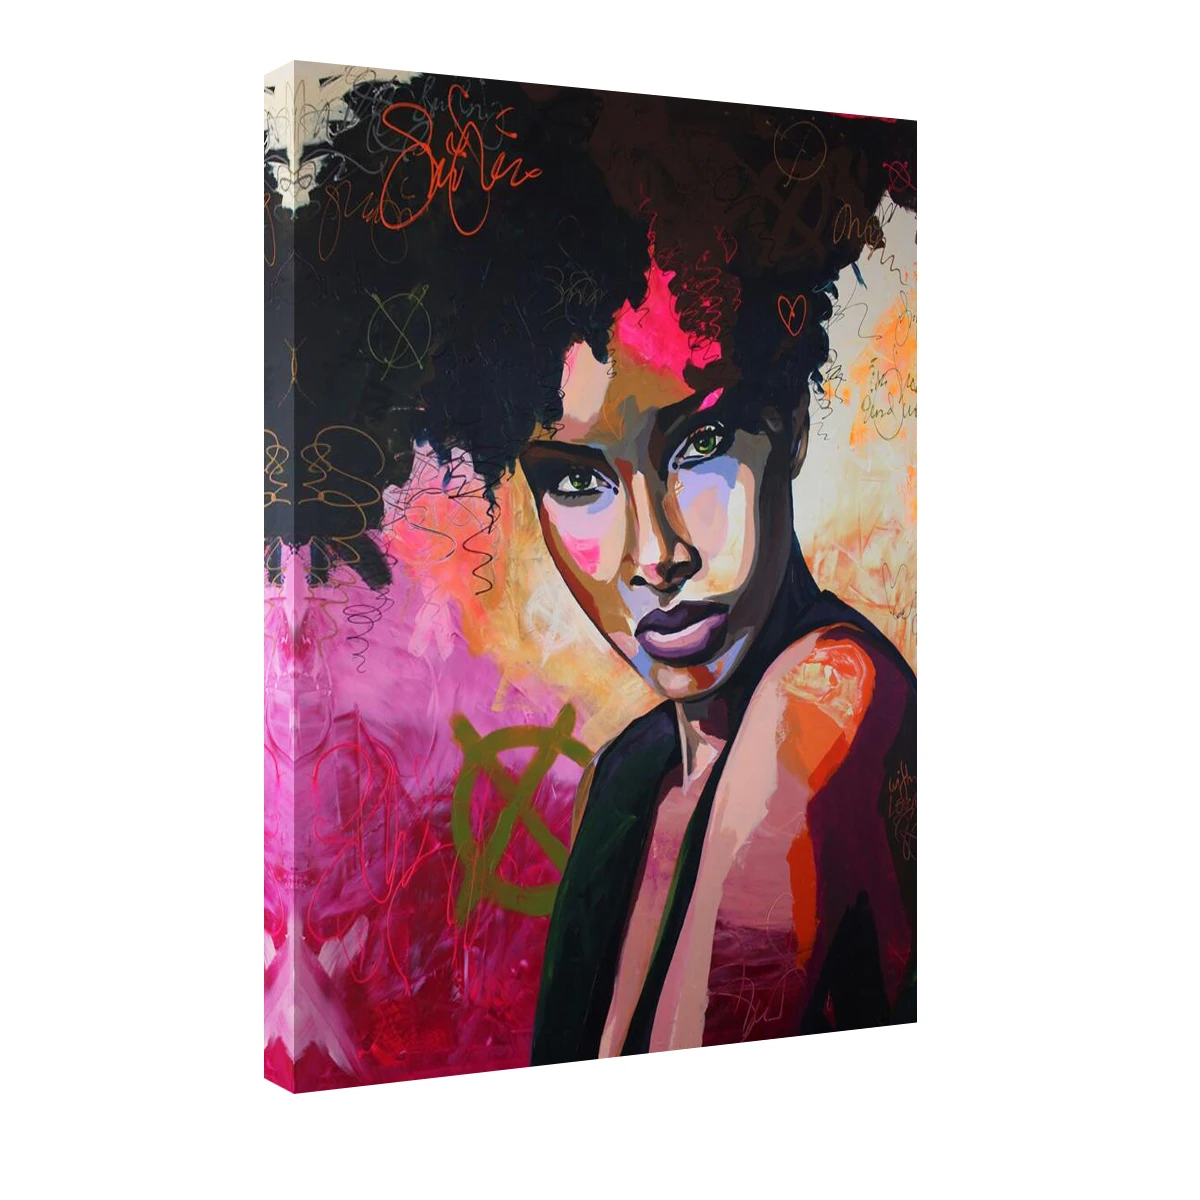 

Pop Art Wall Decor for Living Room Graffiti Woman Painting on Canvas Printed Canvas Wall Art Bedroom Decoration Wall Paintings